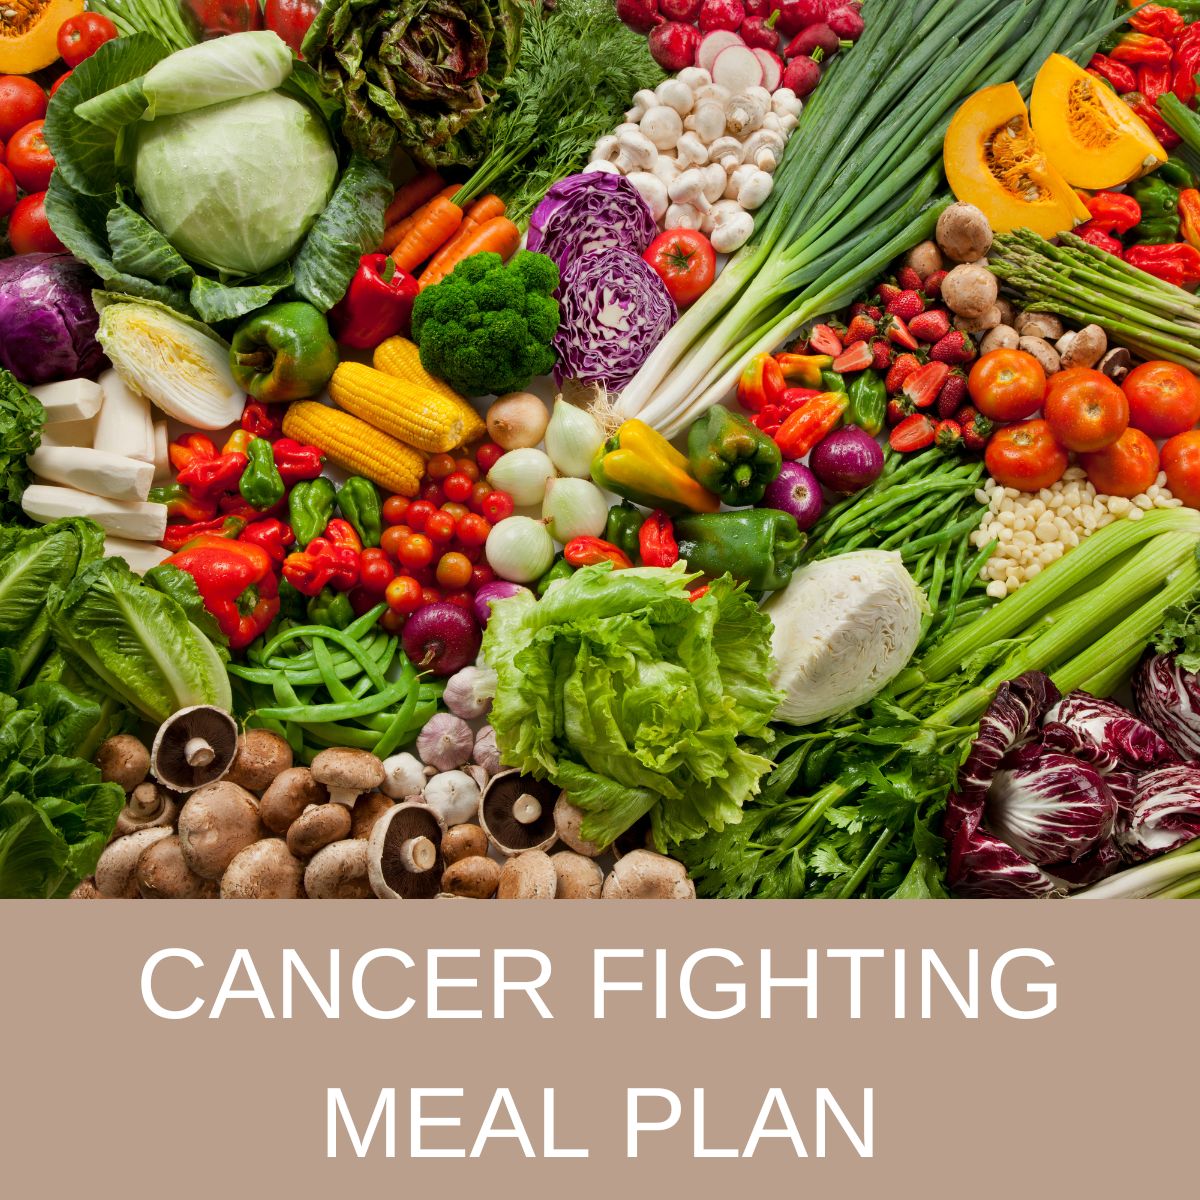 cancer-fighting-meal-plan-with-healthy-fruits-and-vegetables